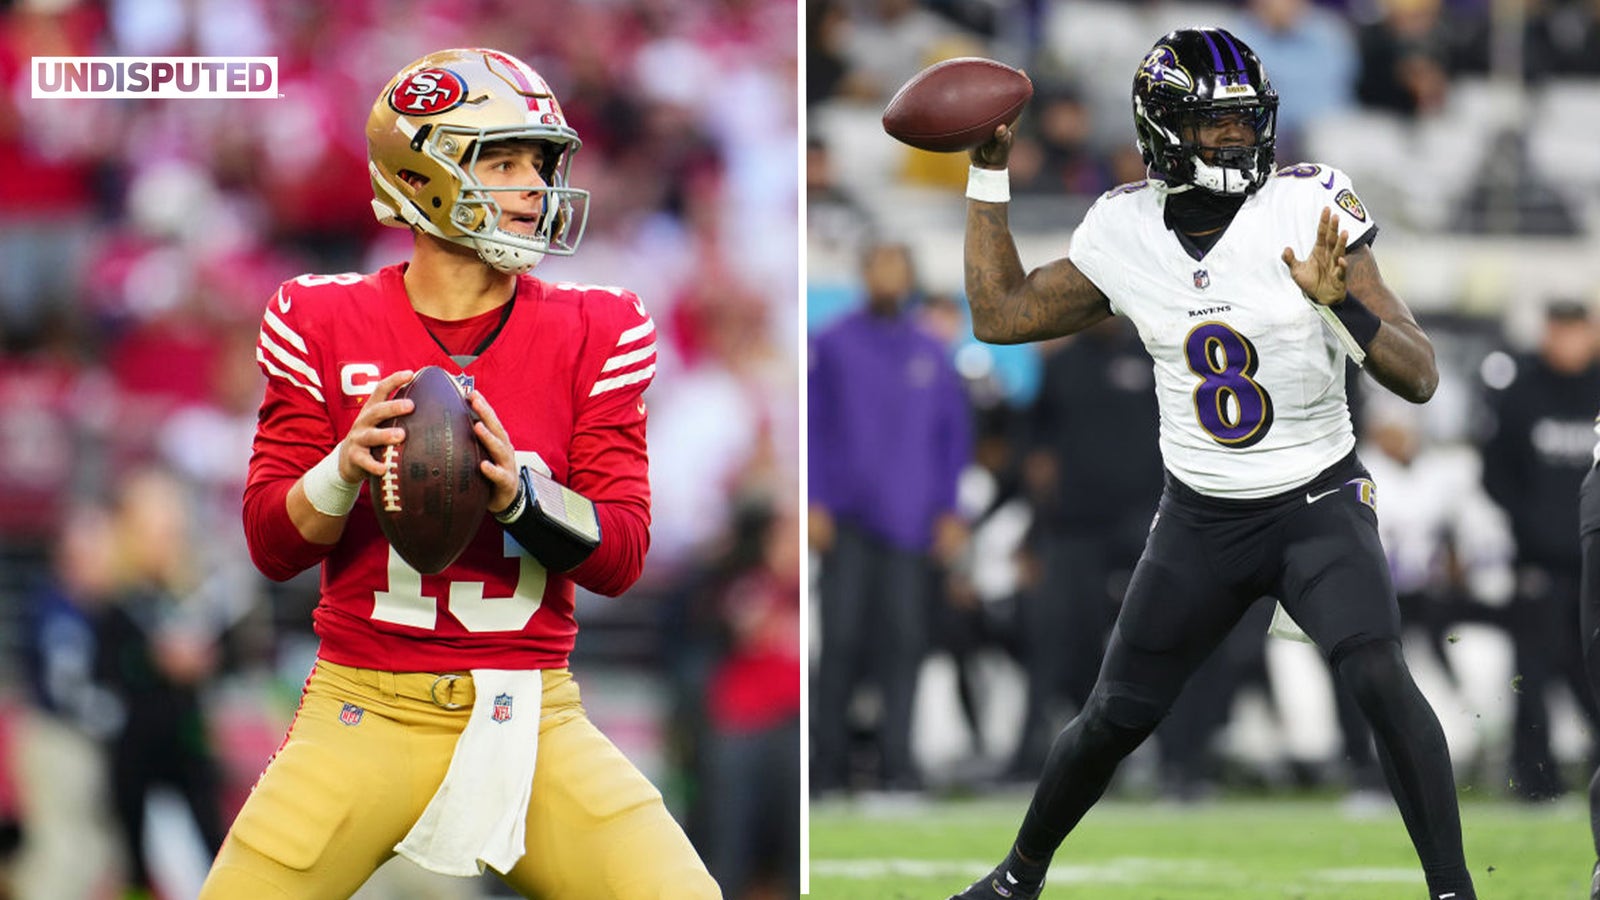 With Ravens and 49ers Week 15 victories, who is the Super Bowl favorite?